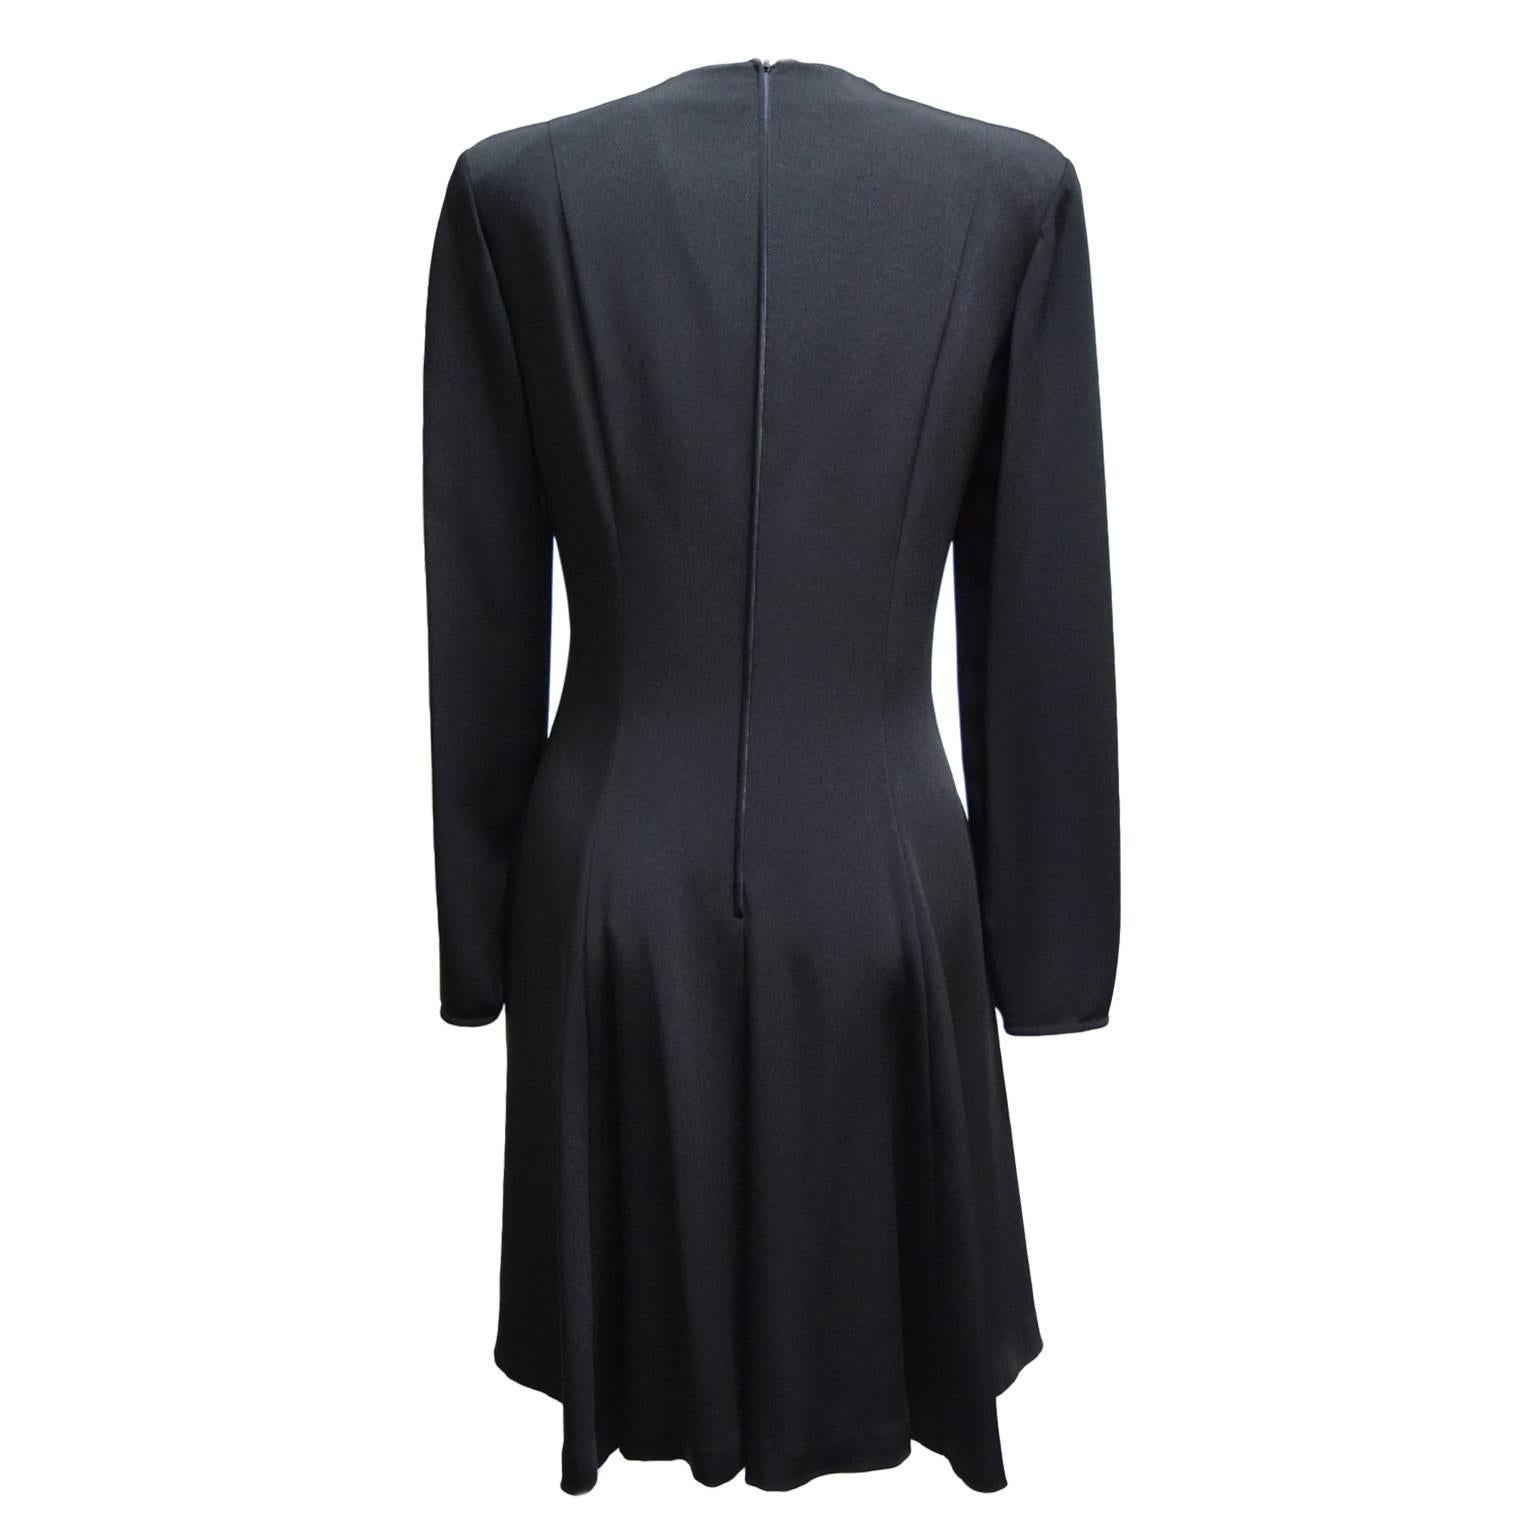 This beautiful piece by Giorgio Armani is fully lined and made from 100% silk. The dress is long sleeved and has a zipped back and knife pleated skirt. 